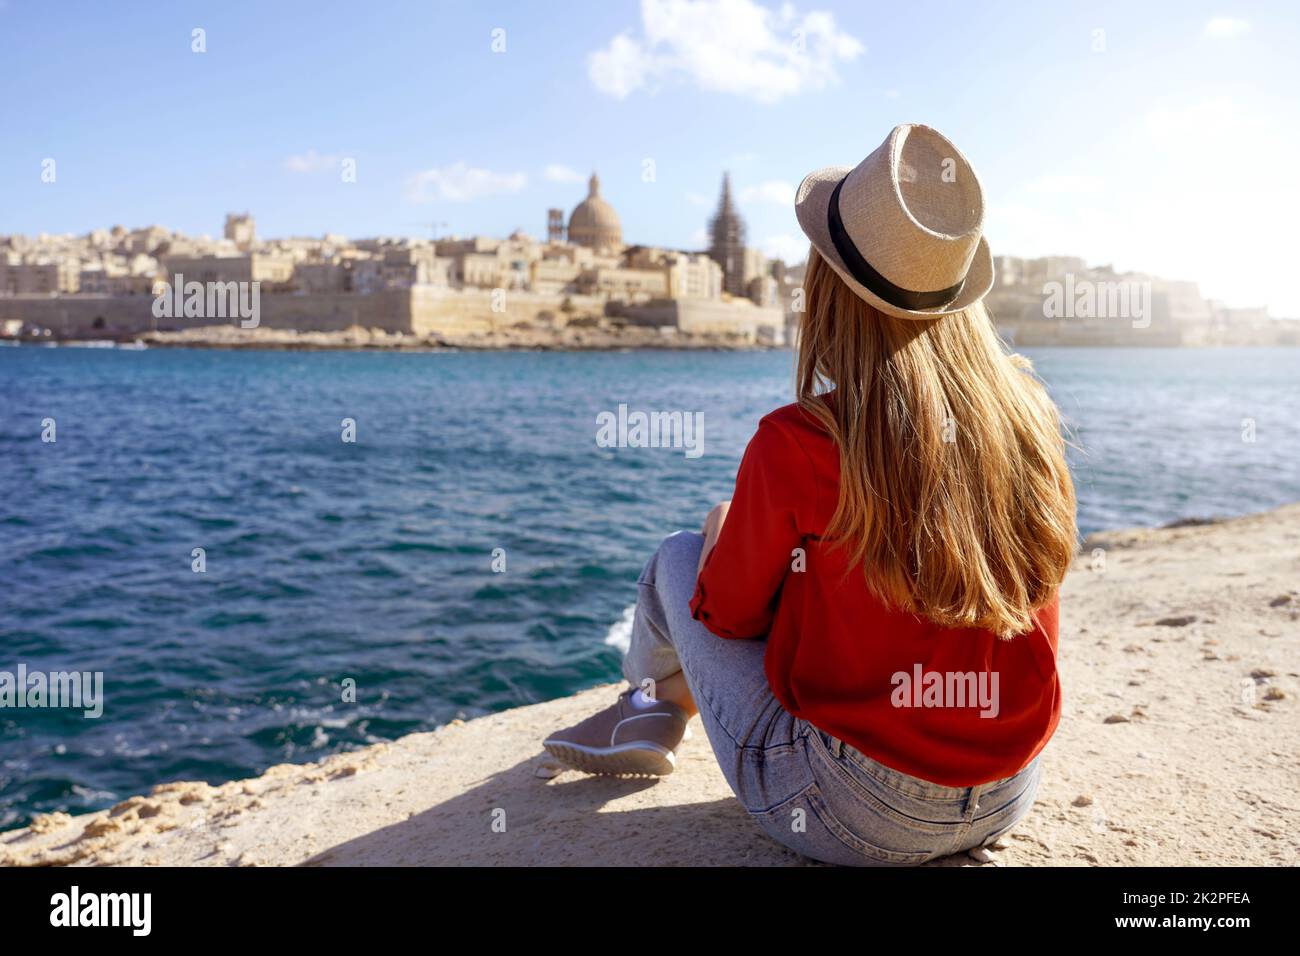 Travel concept with independent people enjoying the outdoor leisure activity and wanderlust life lifestyle. Young woman sits down on the edge of the sea looking amazing landscape of Valletta, Malta. Stock Photo